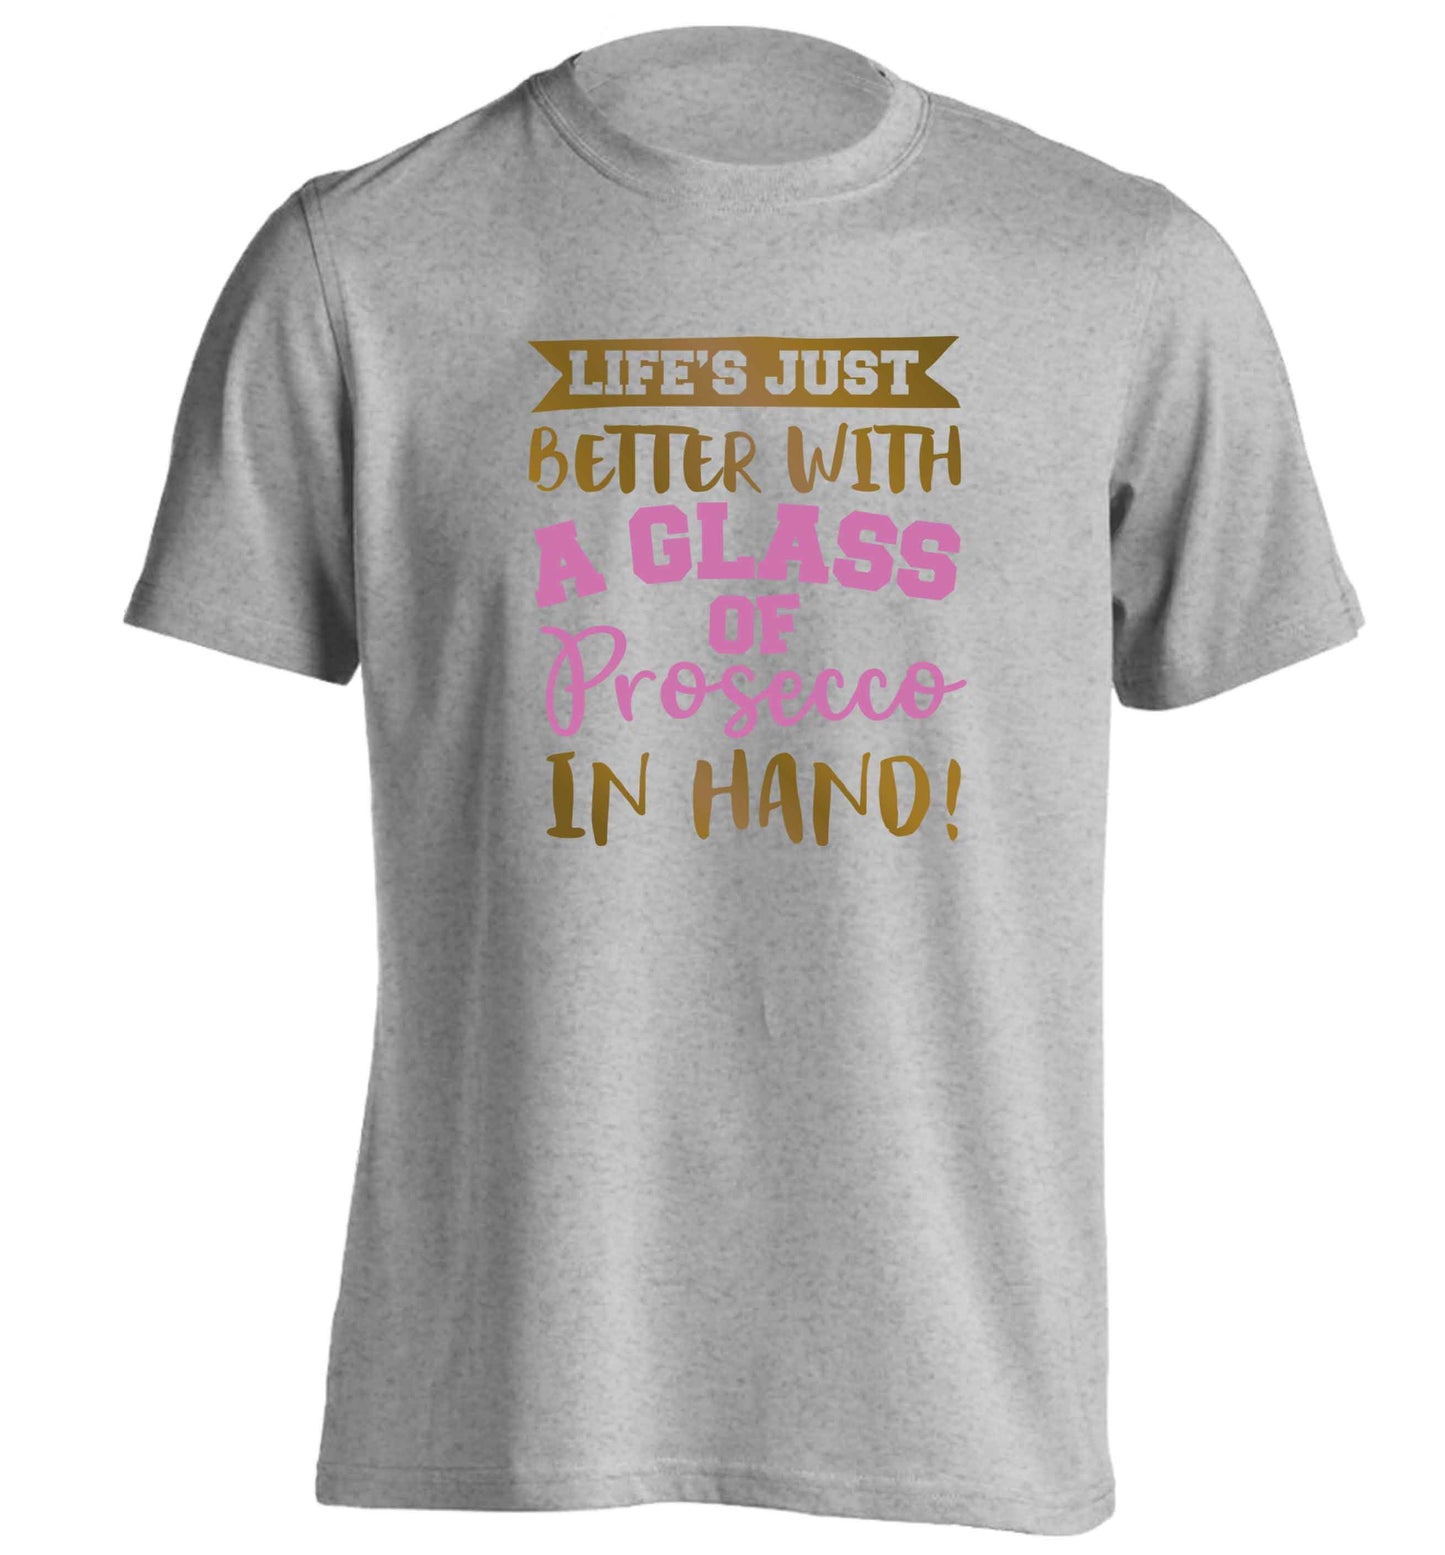 Life's just better with a glass of prosecco in hand adults unisex grey Tshirt 2XL